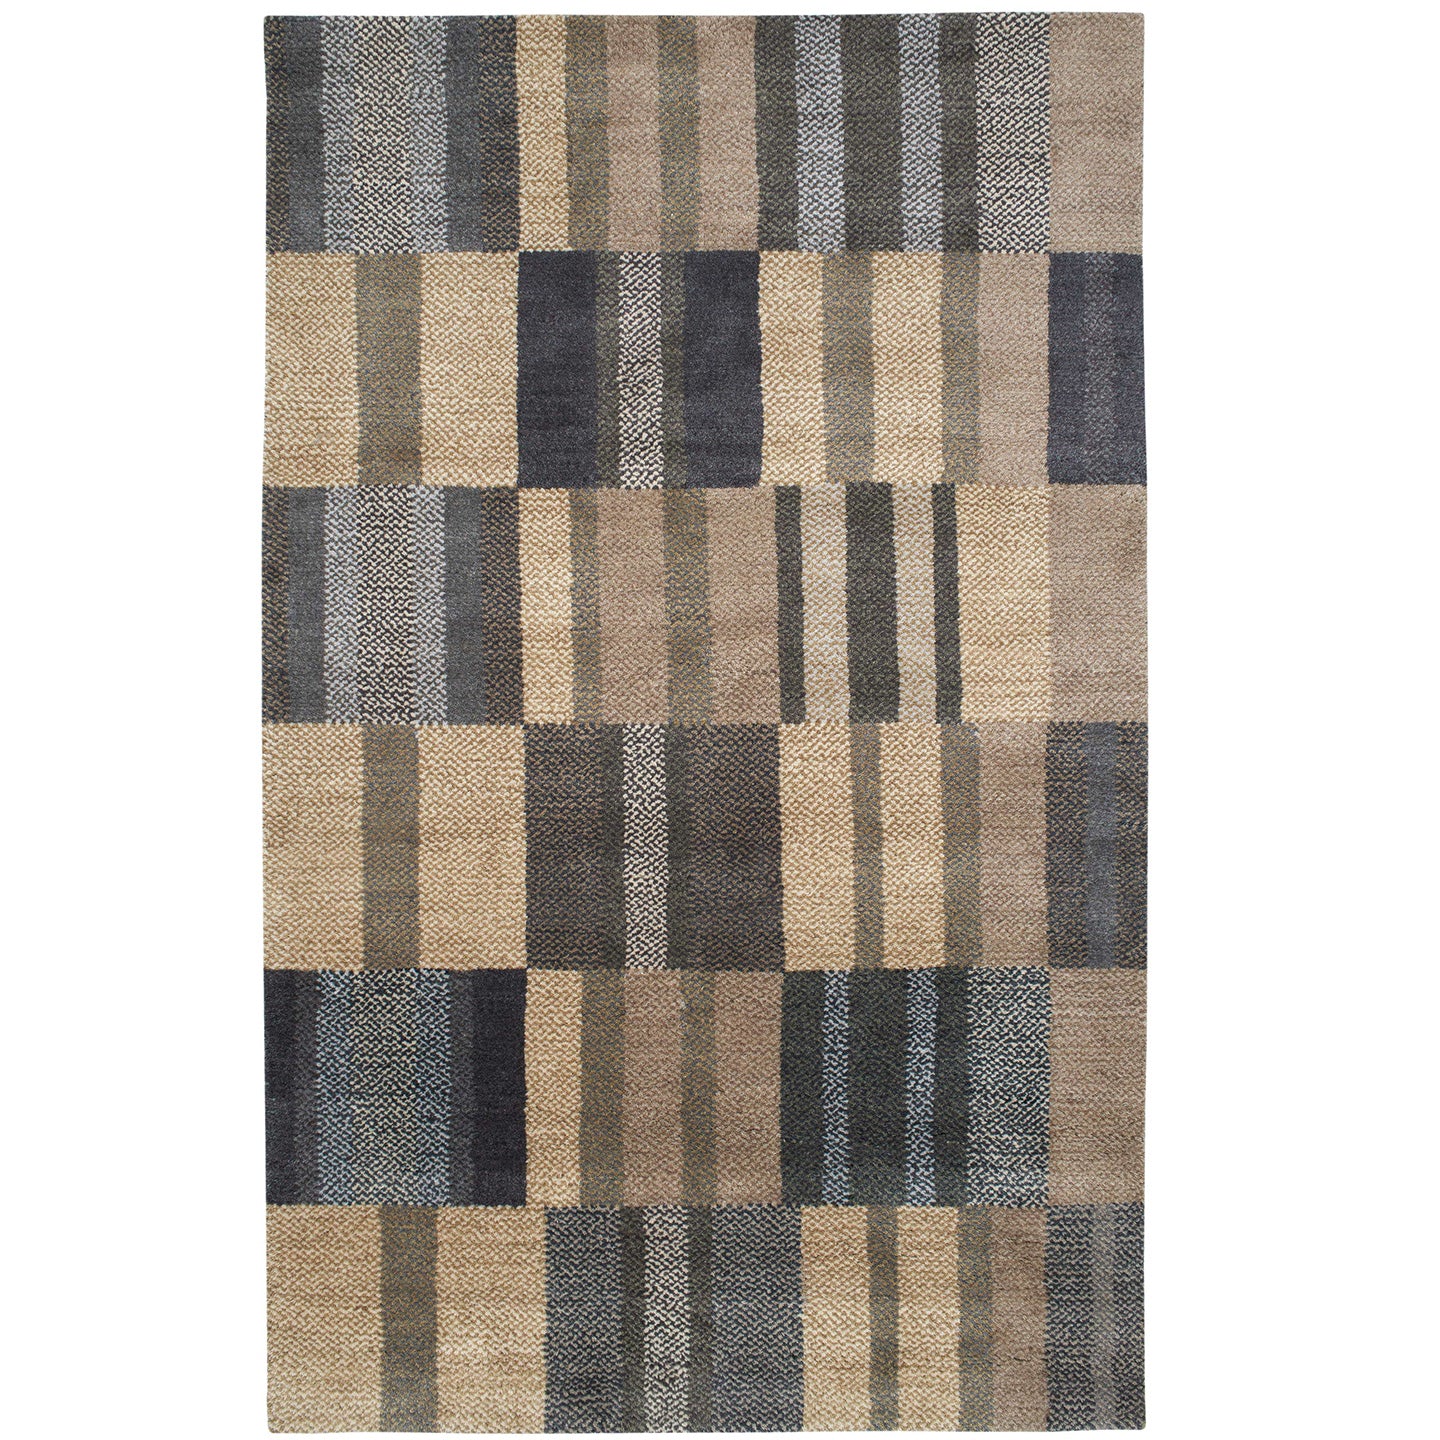 Fairhaven Natural Hand Loom Knotted Wool Rug